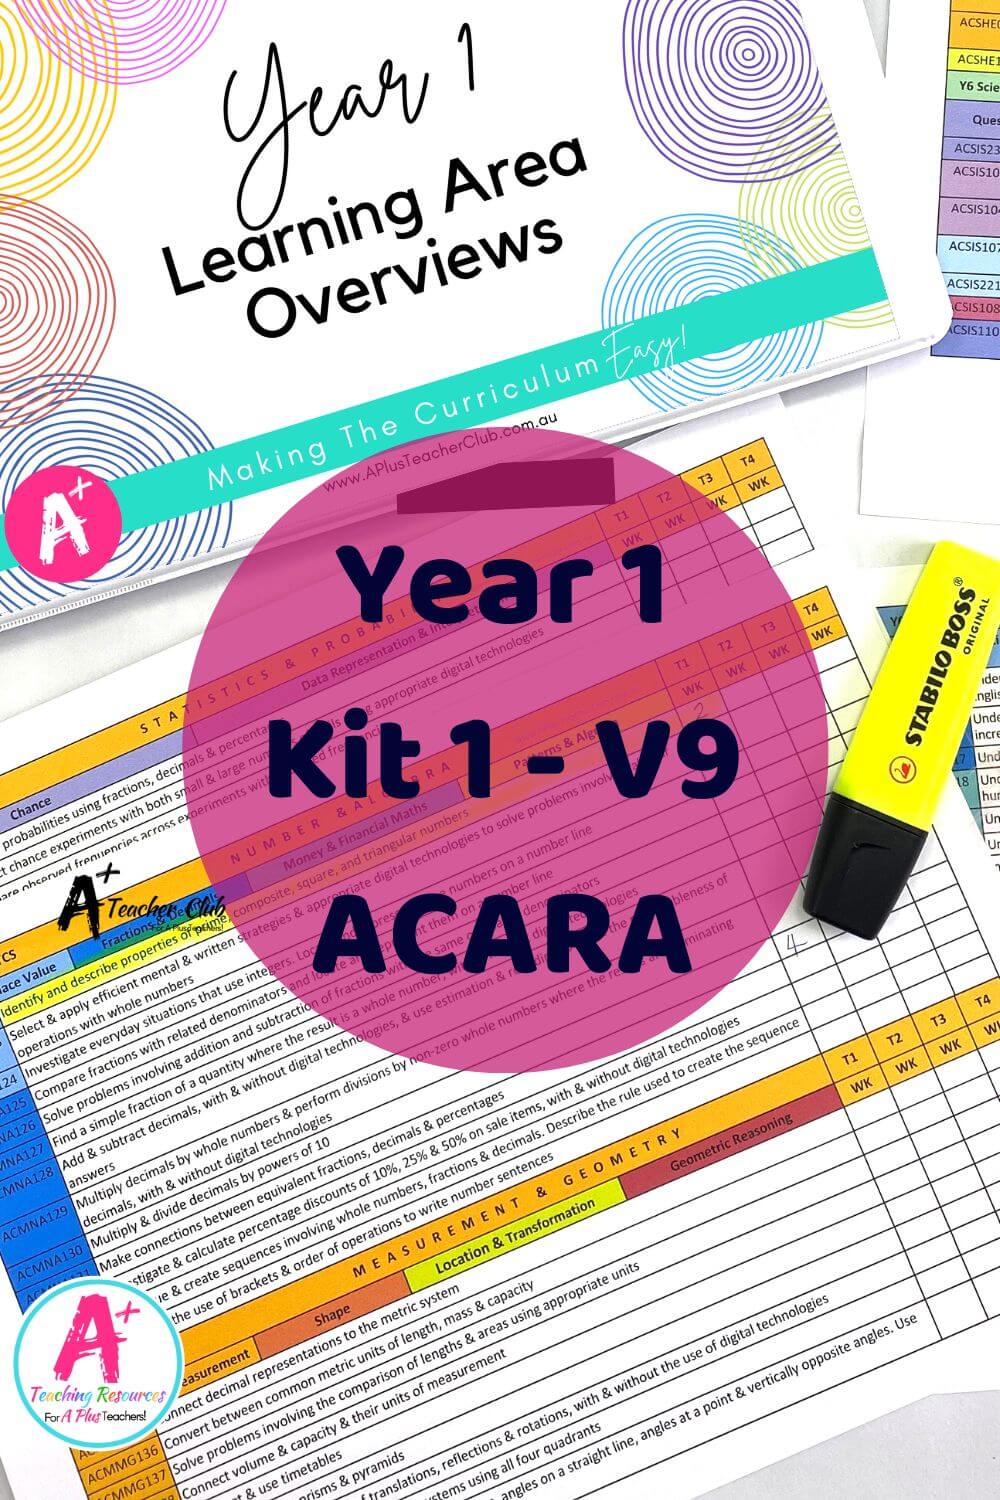 Year 1 Forward Planning Curriculum Overview ACARA V9